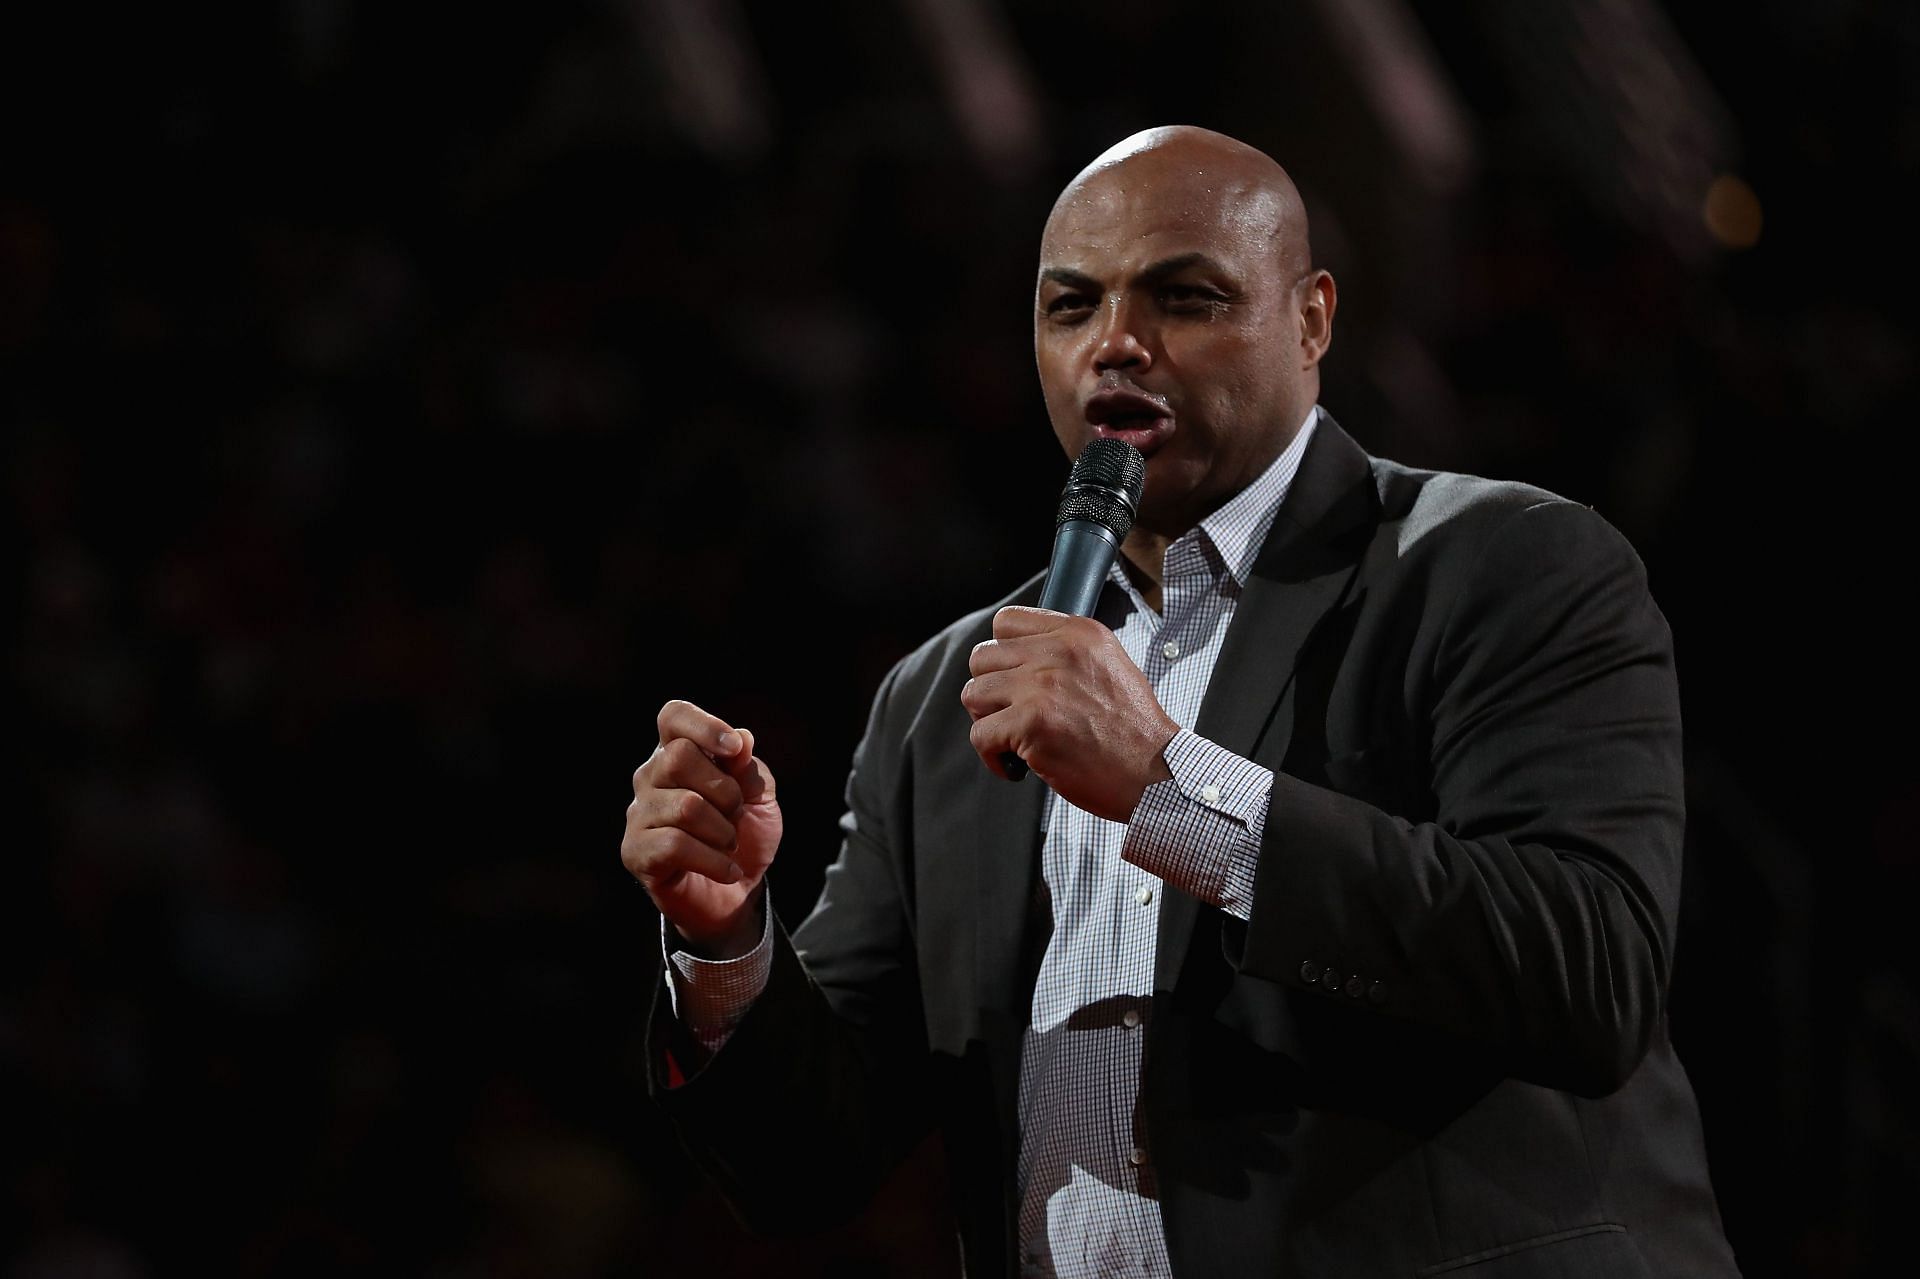 Charles Barkley is a Hall of Fame player.